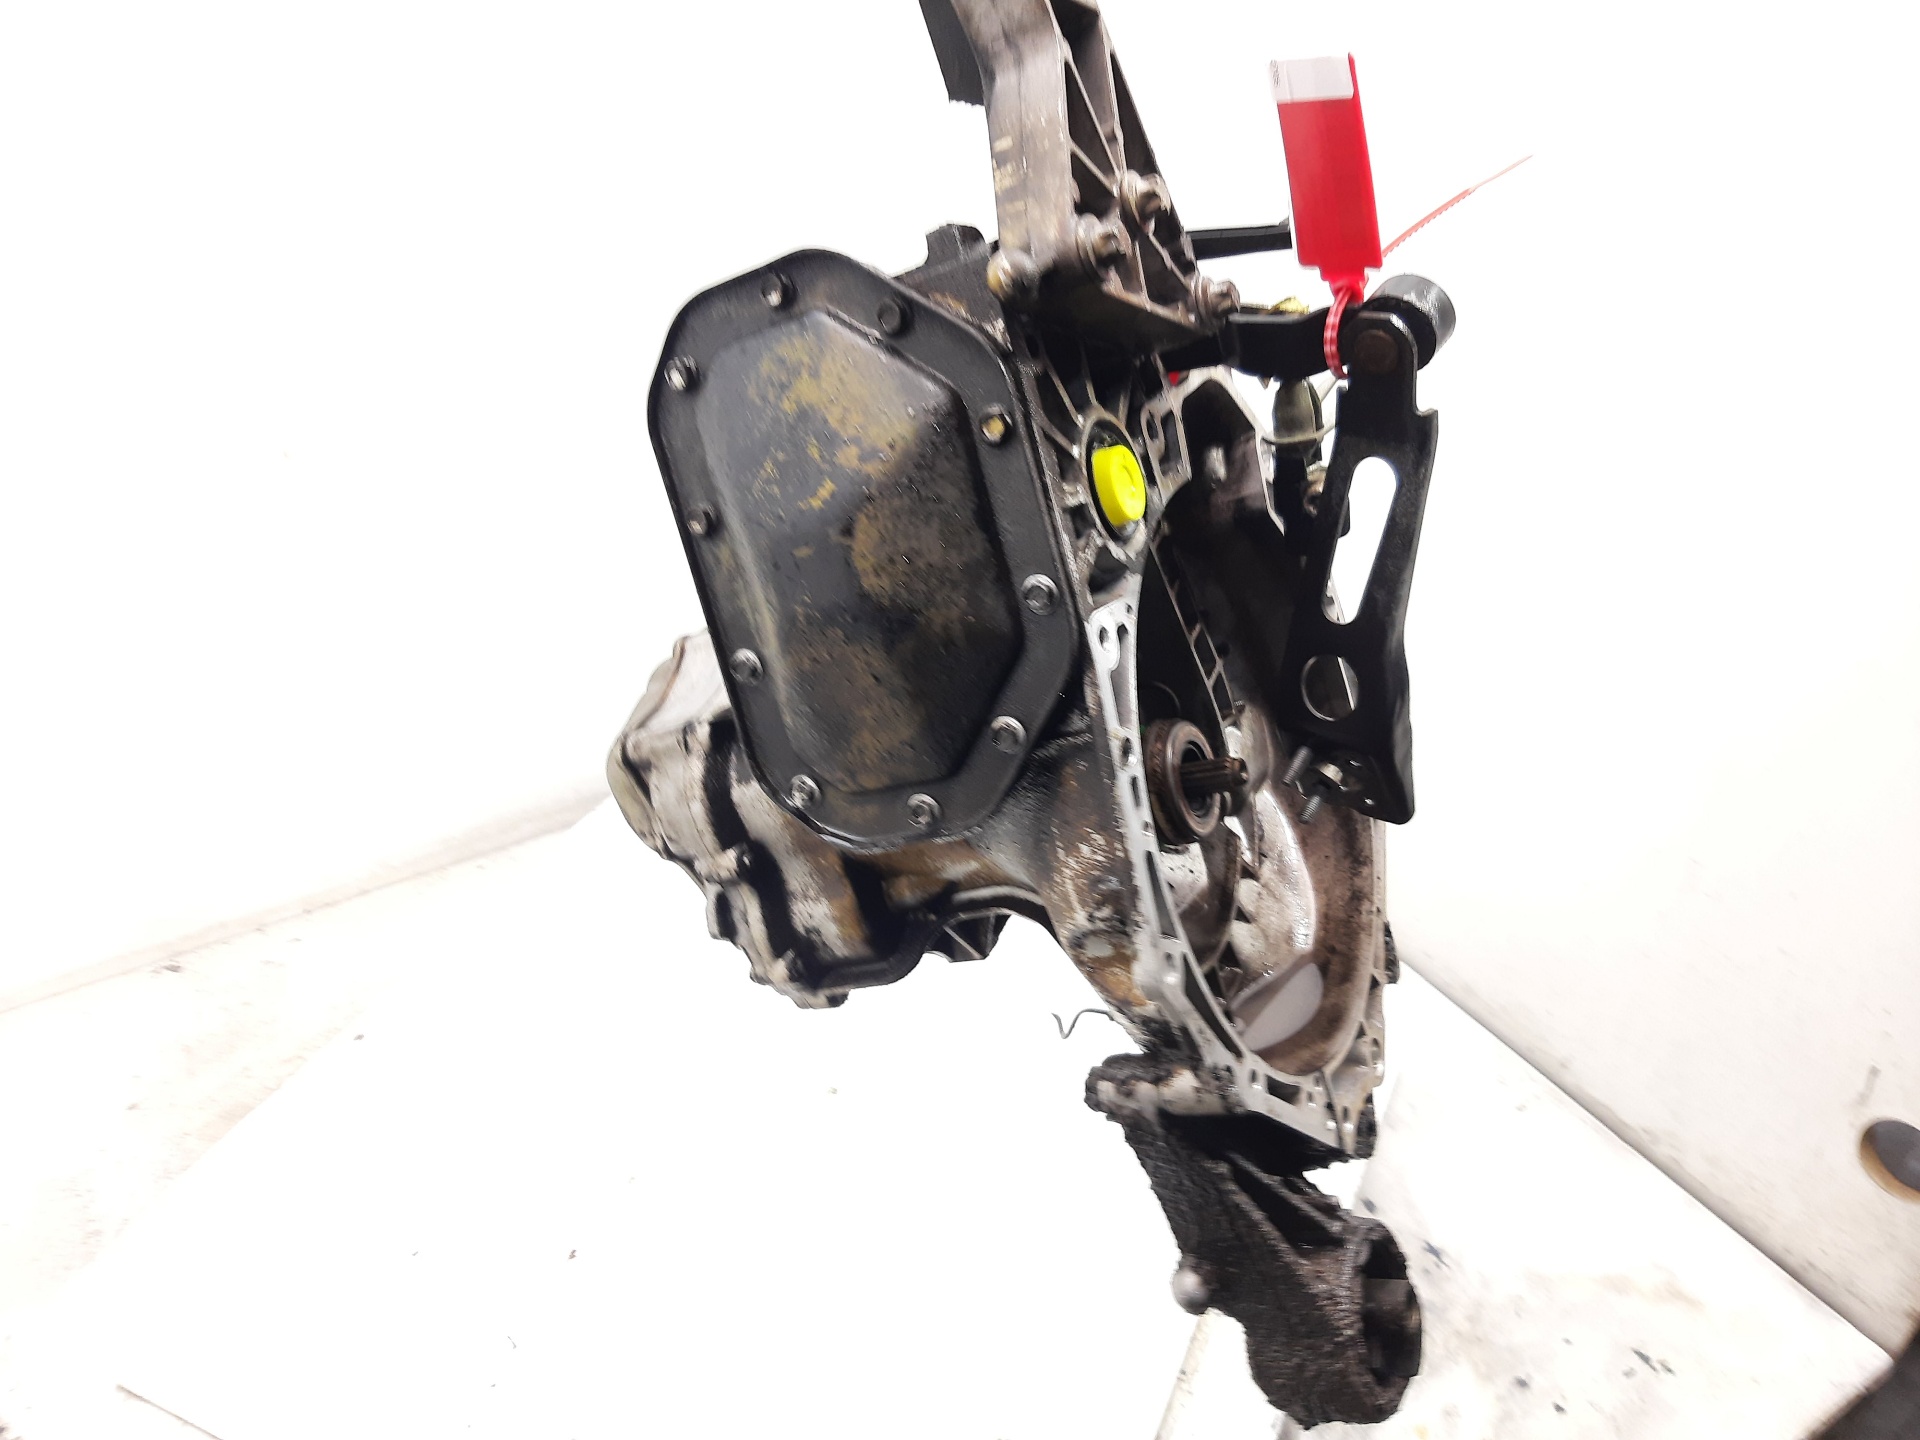 OPEL Astra H (2004-2014) Gearbox BW4176, 5VELOCIDADES 24139324